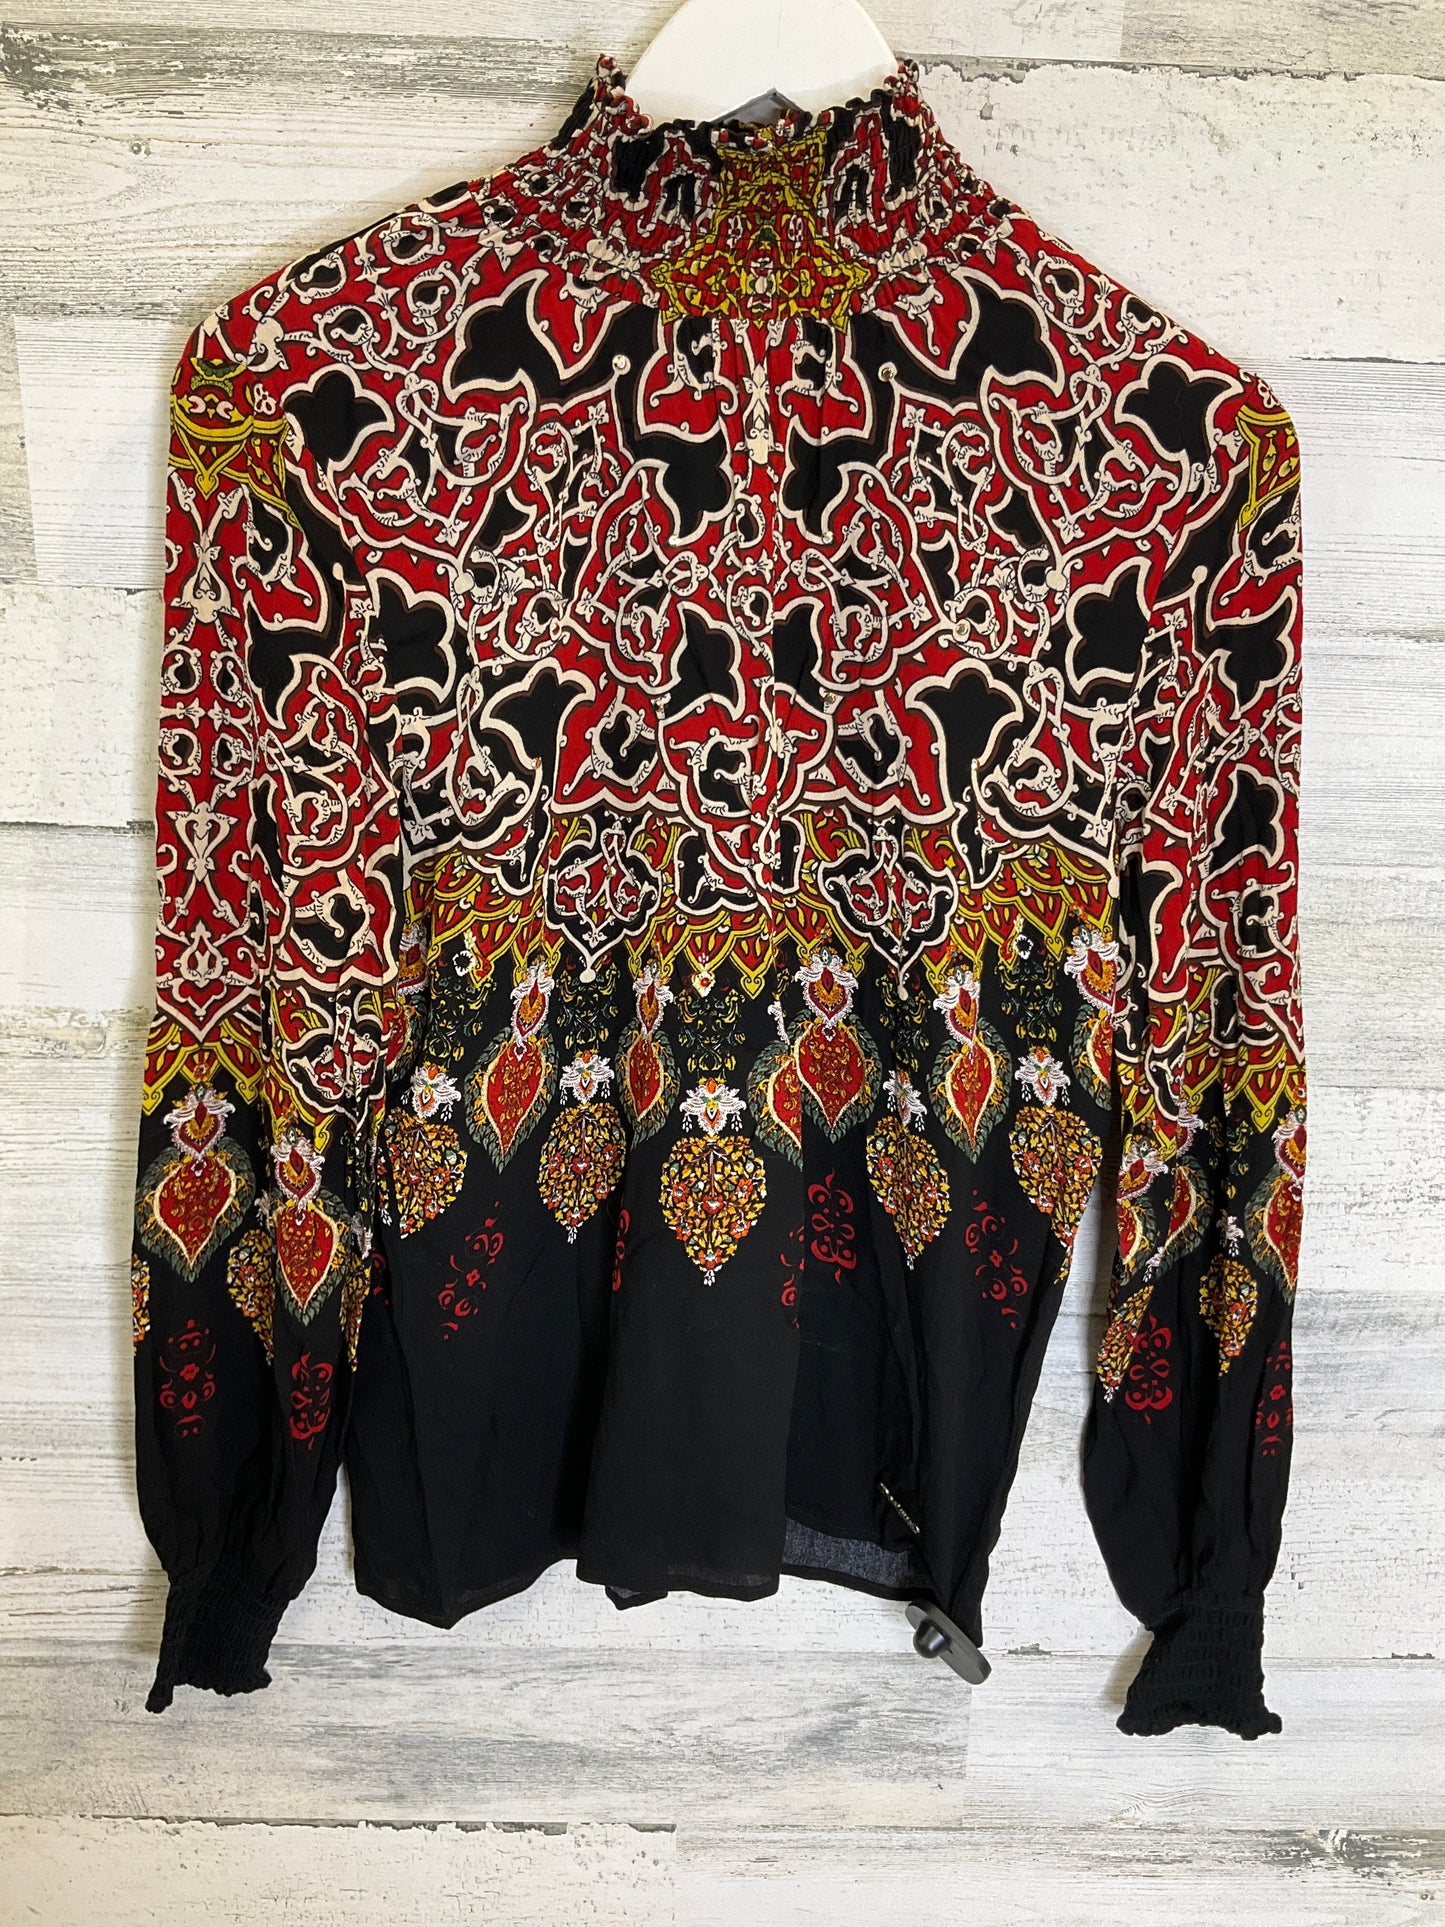 Black & Red Top Long Sleeve Desigual, Size S